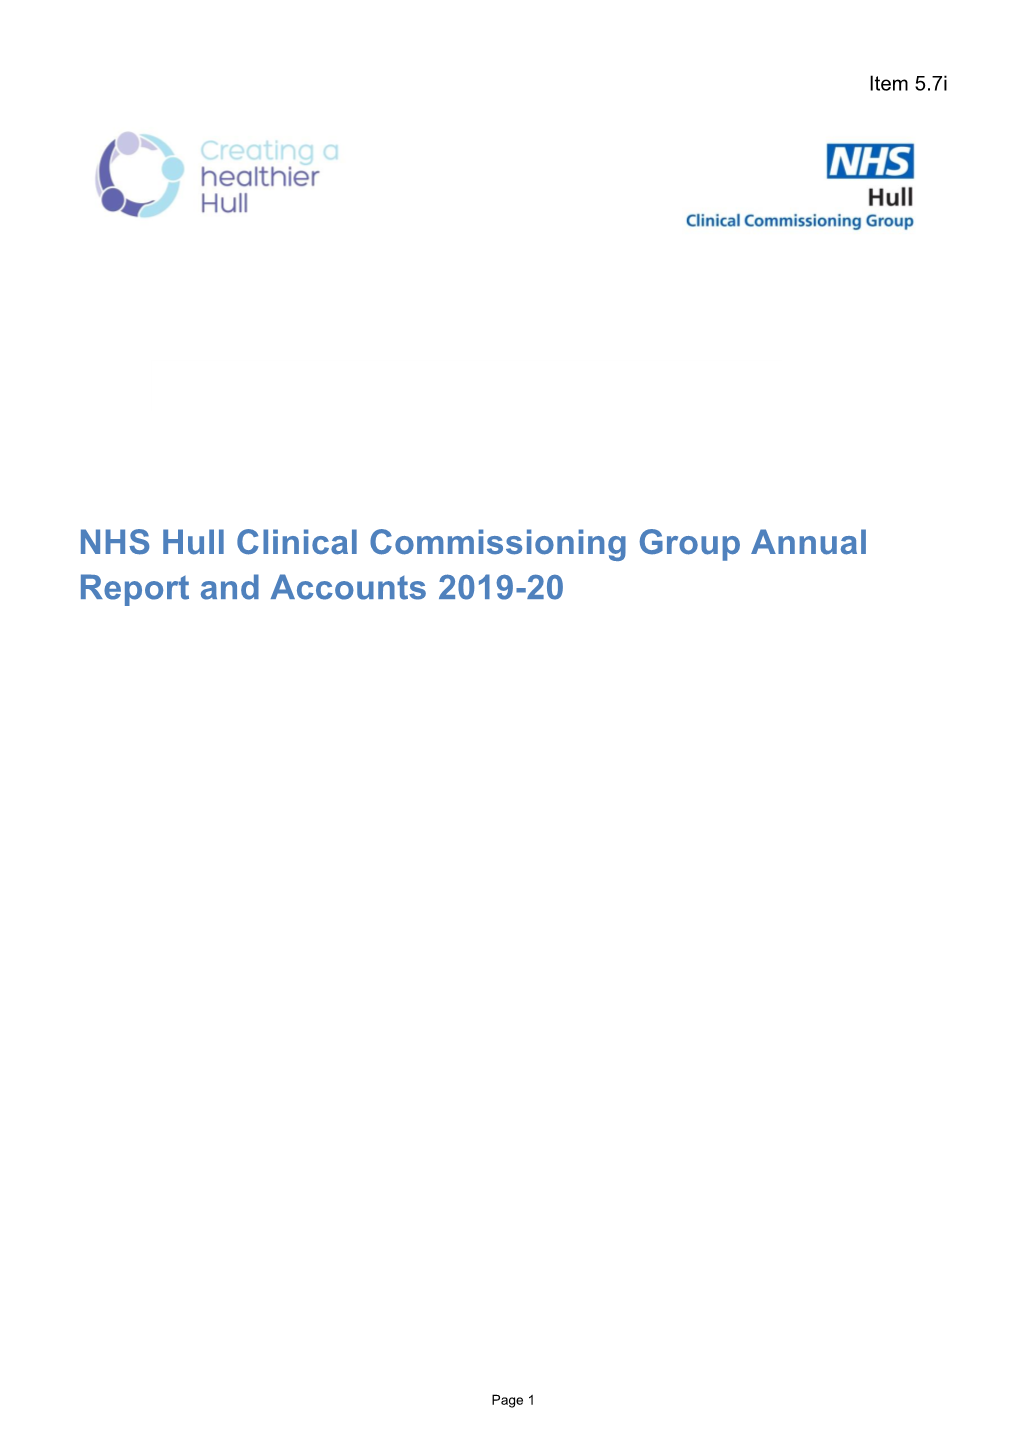 NHS Hull Clinical Commissioning Group Annual Report and Accounts 2019-20